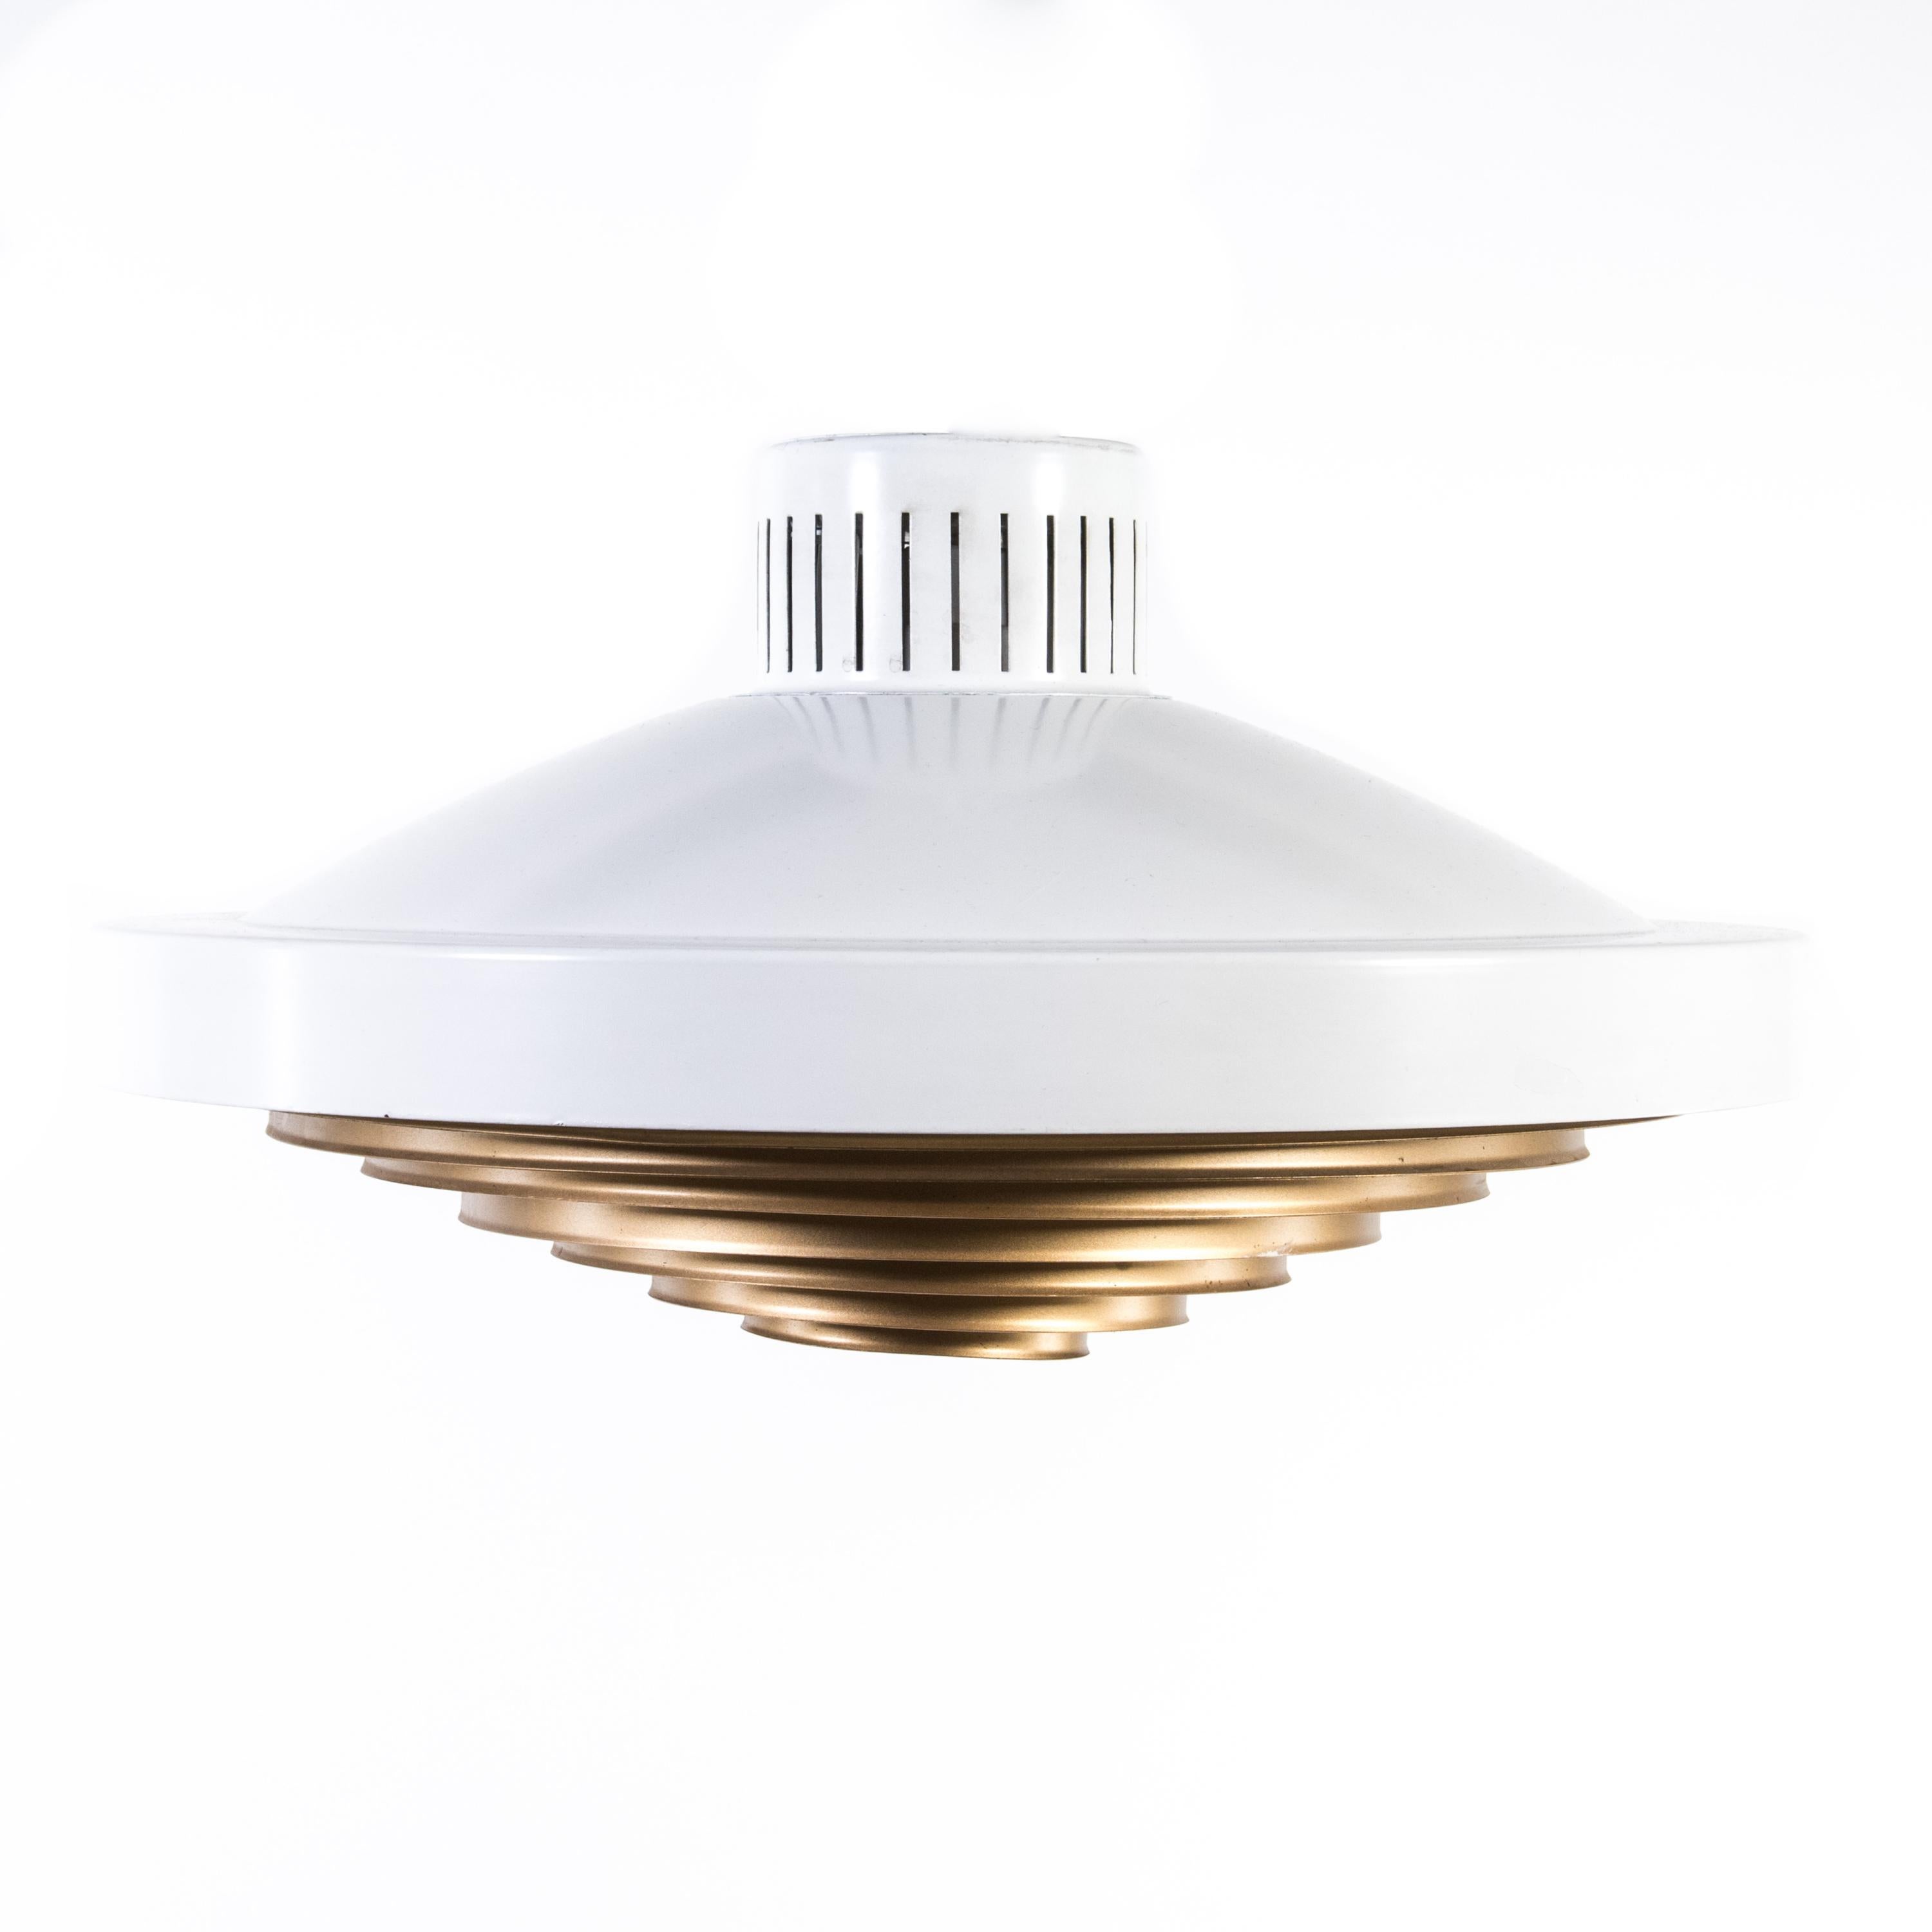 Larger flush mount / ceiling lamp (4 available) by Finnish designer Lisa Johansson-Pape (1907-1989) with brass louvered diffuser made by Finnish manufacturer Stockman Orno. 

Diameter 44 cm x H: 21 cm. 
1 x light bulb max. 100W.

Opening at top